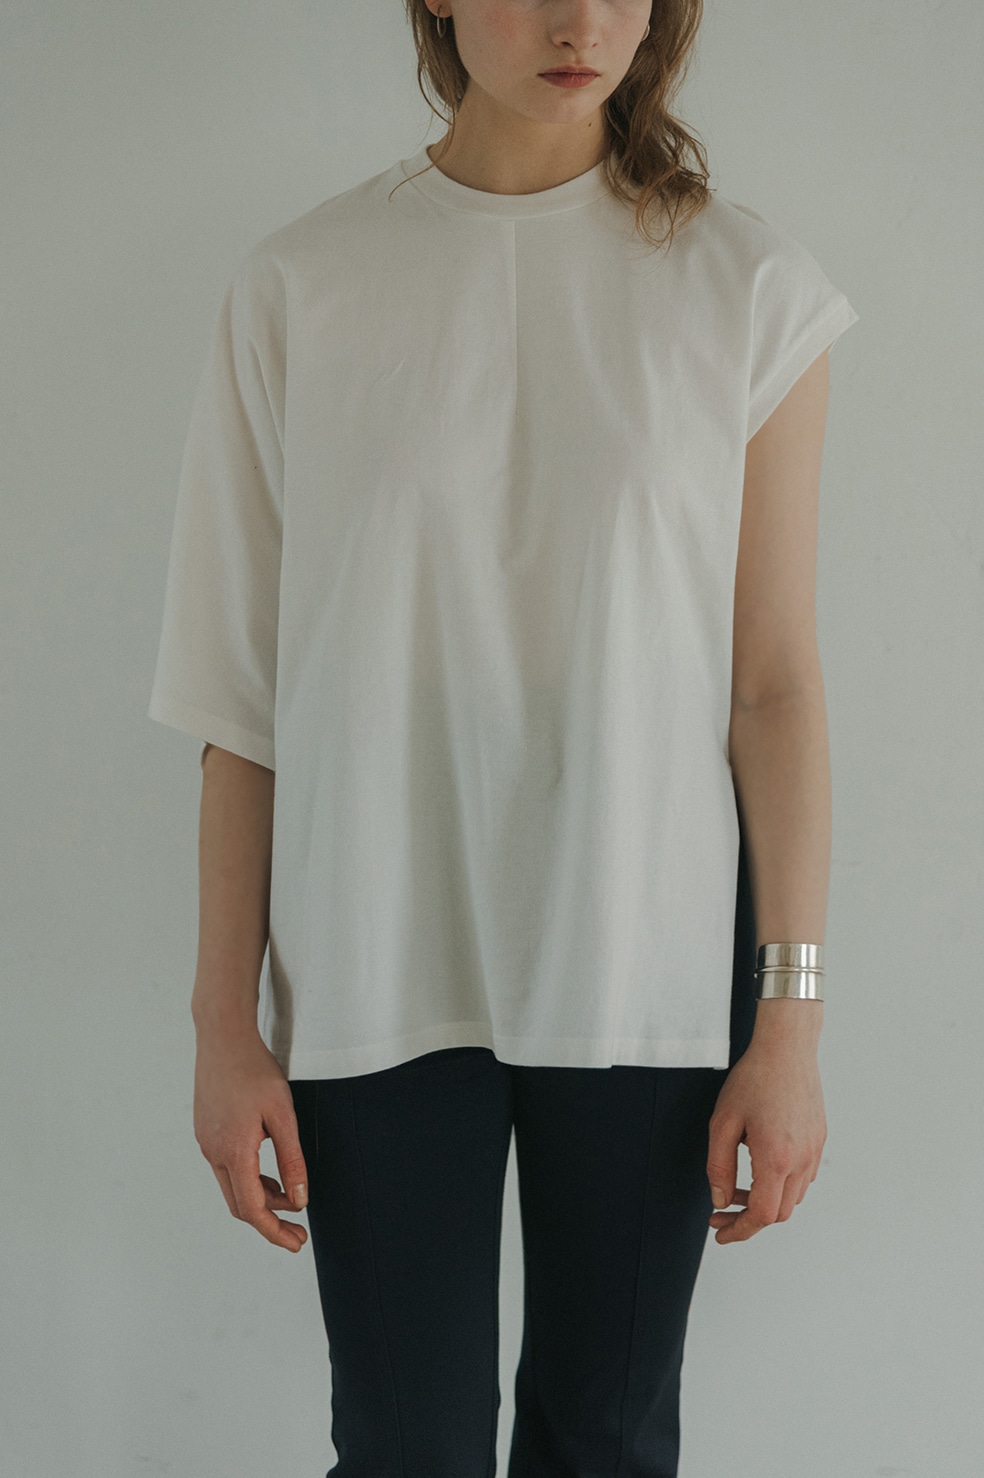 ASYMMETRY DESIGN TOPS｜TOPS(トップス)｜CLANE OFFICIAL ONLINE STORE